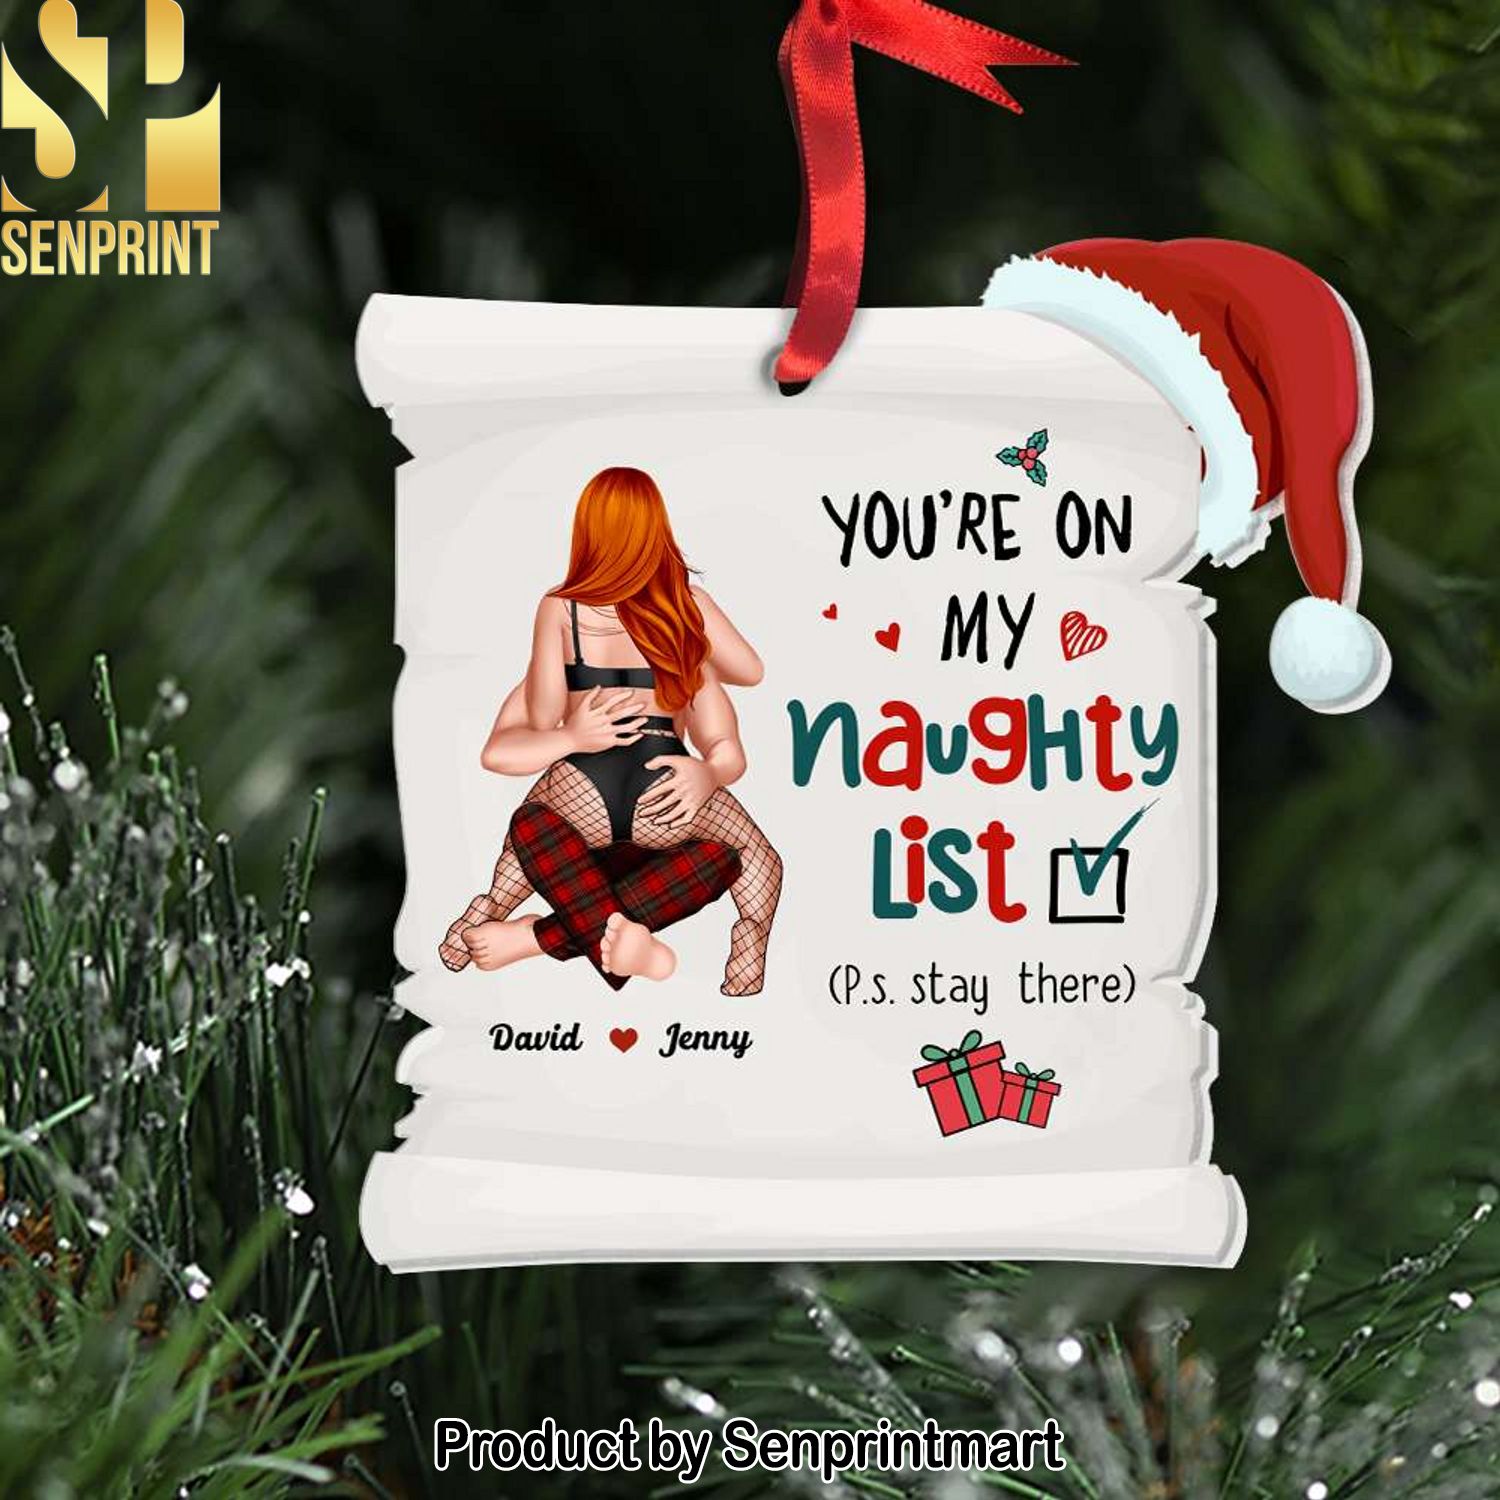 You’re On My Naughty List, Couple Gift, Personalized Acrylic Ornament, Funny Couple Ornament, Christmas Gift